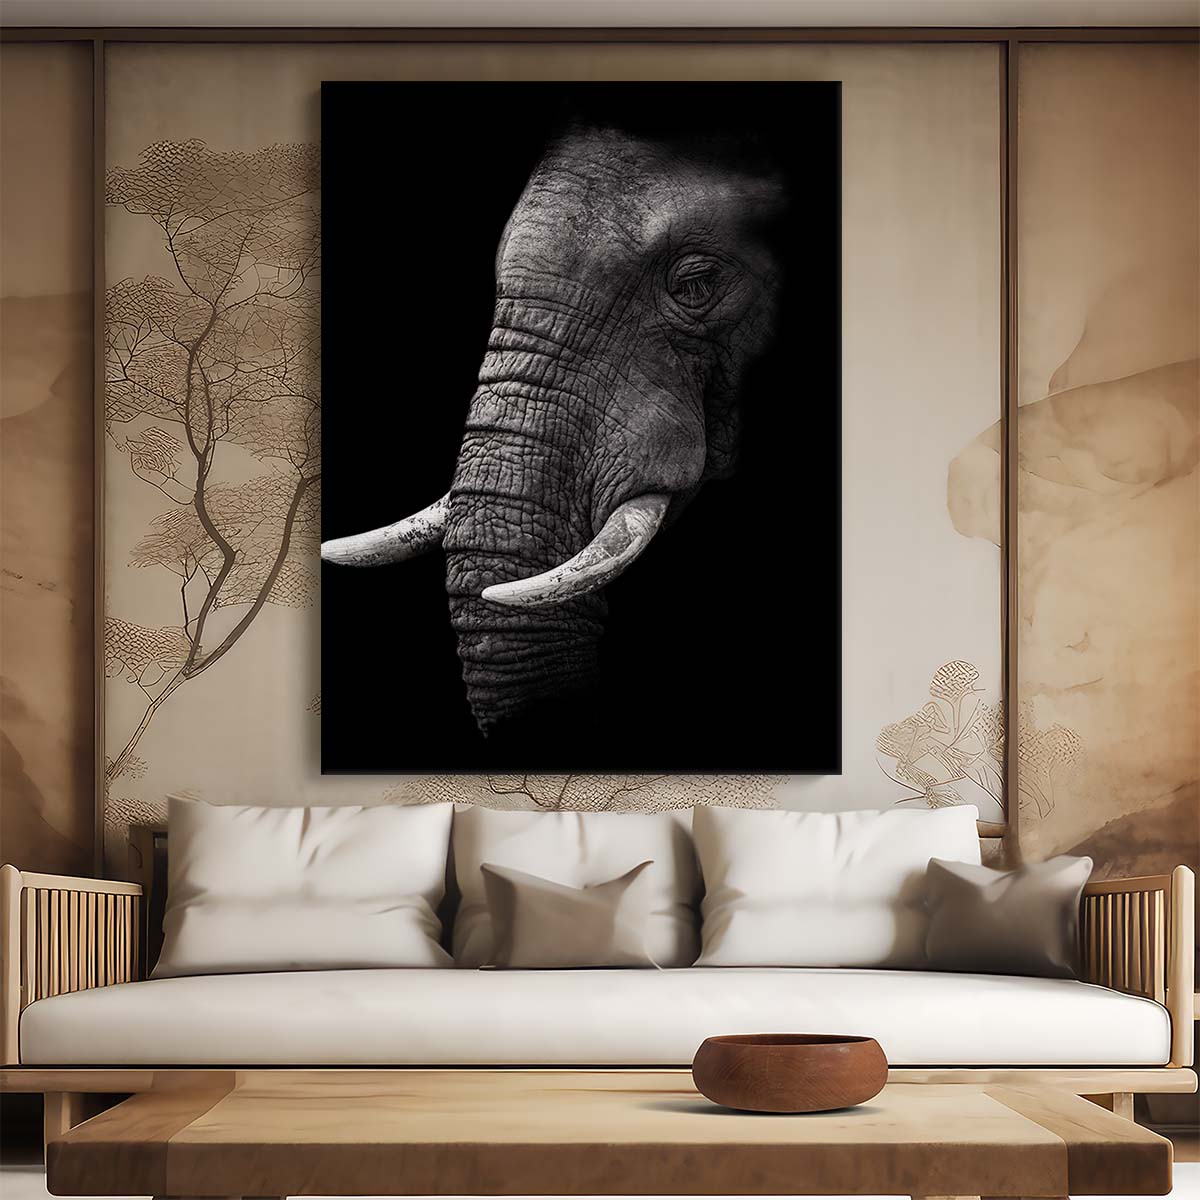 Monochrome African Elephant Photography Wrinkled, Emotional, by Luxuriance Designs, made in USA